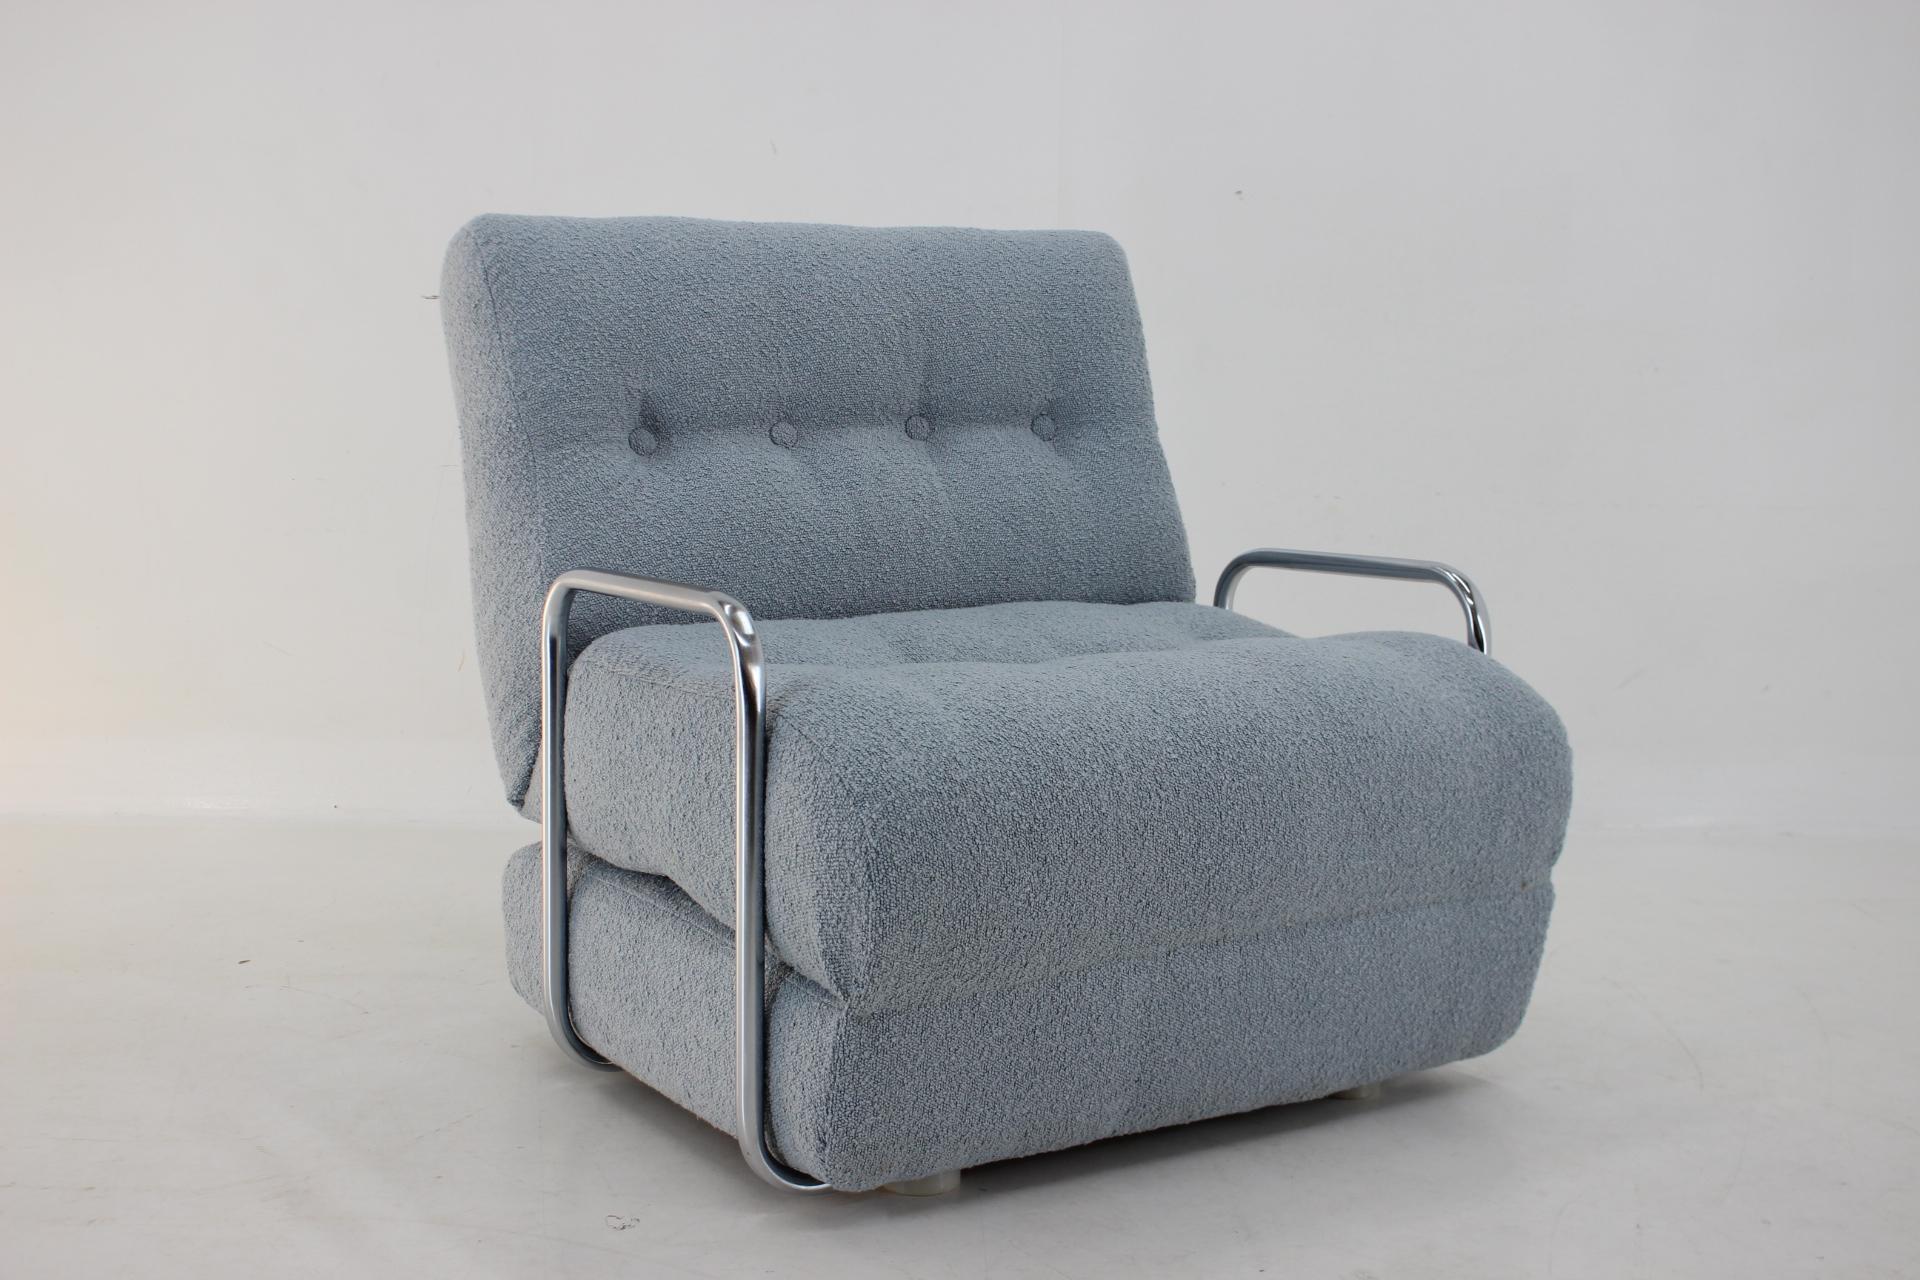 - convertible to bed
 - newly upholstered in light blue bouclé fabric 
- unfolded 188 x 22.